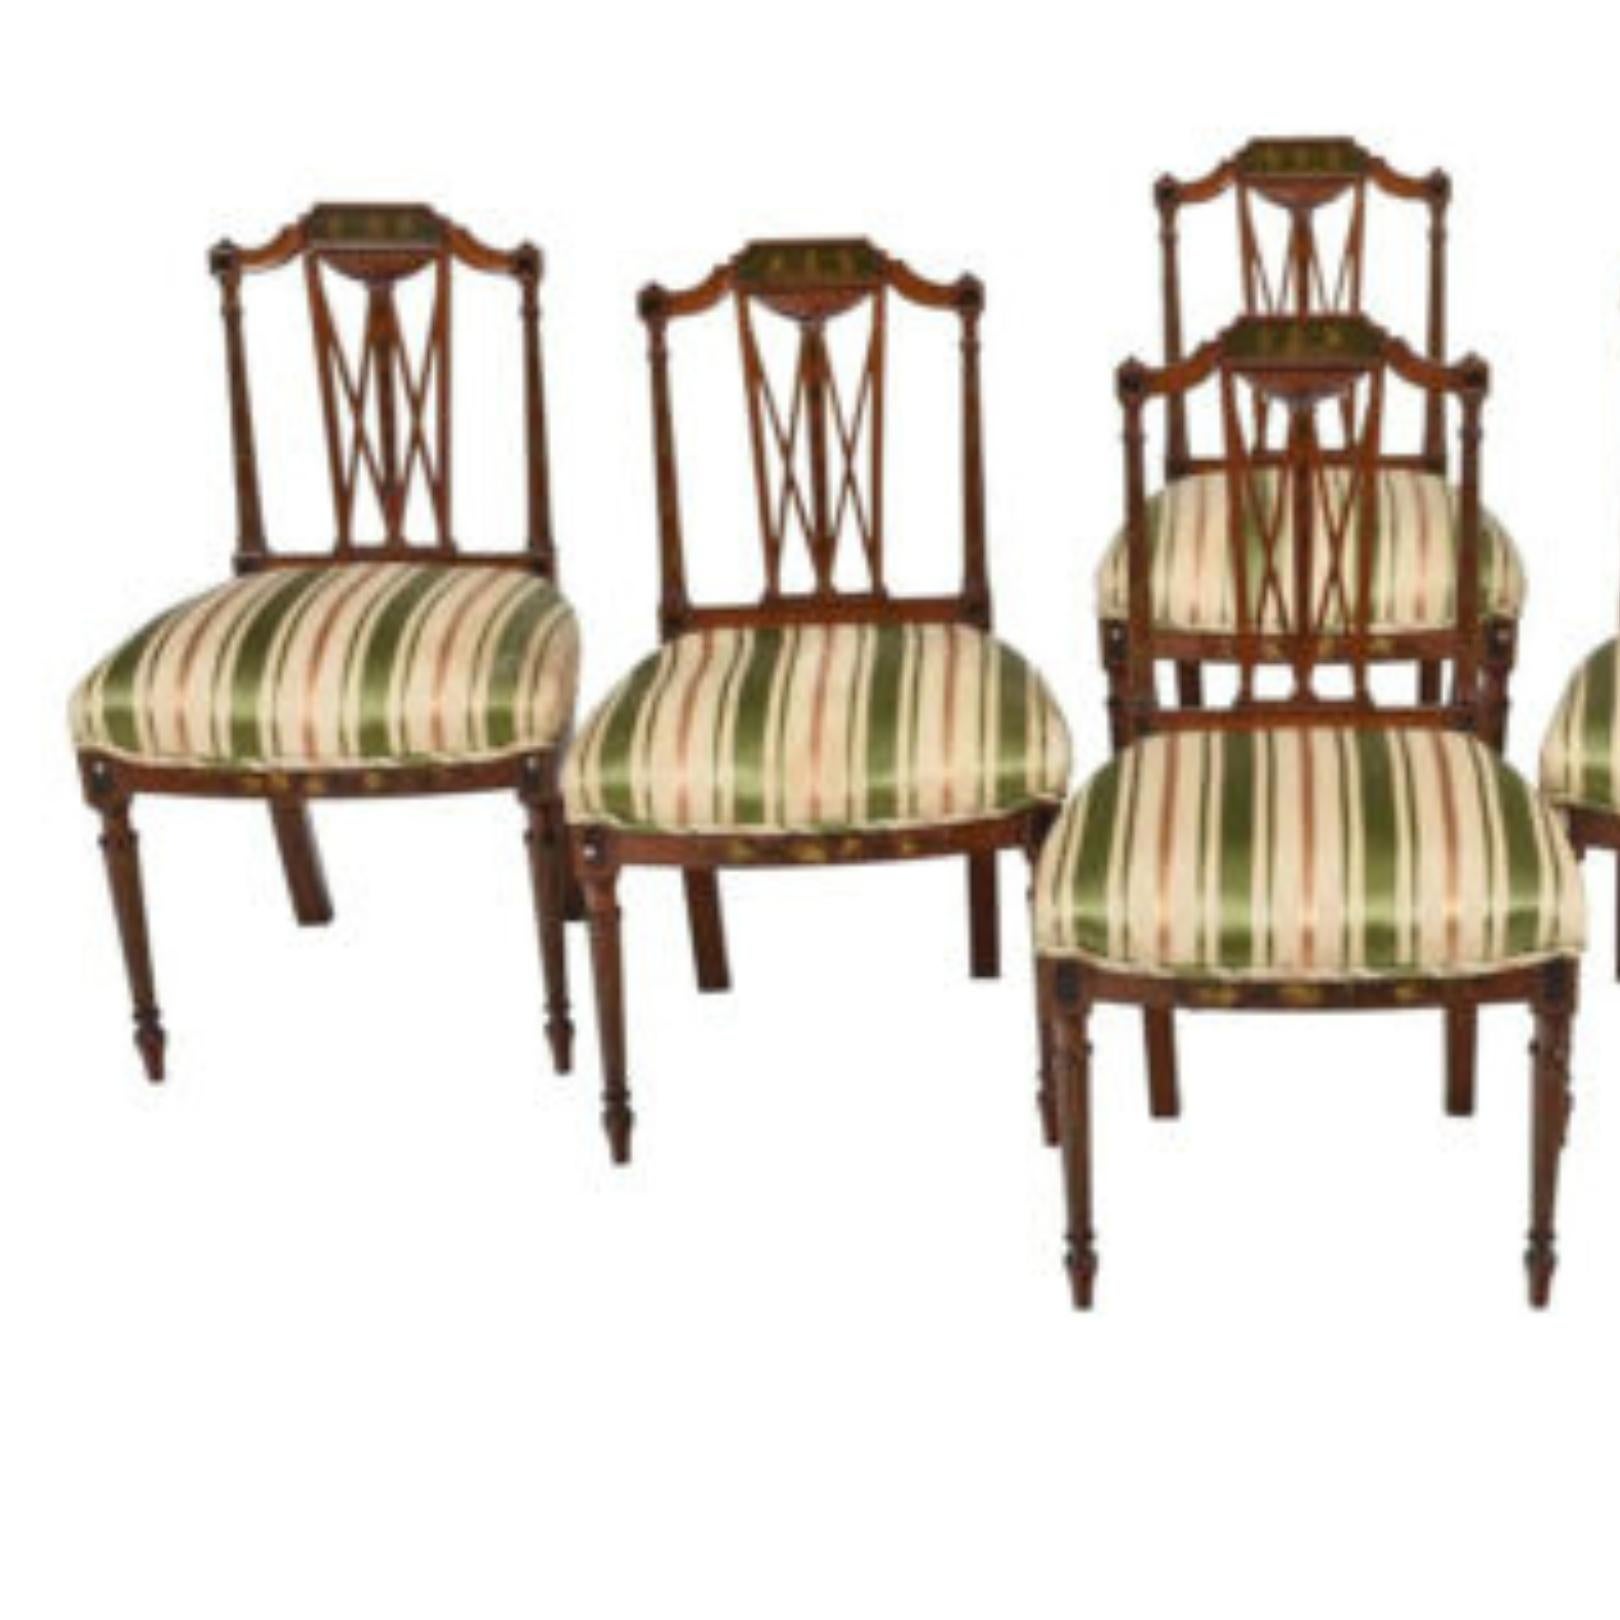 Handsome Early 1900s Antique Silk, Set of 6, Edwardian, Paint Decorated Dining Chairs!!

Antique Chairs, Dining, Silk, Set of Six, Edwardian Paint Decorated, Early 1900s, 20th century!!

Circa 1900, each light wood frame with a painted highlights